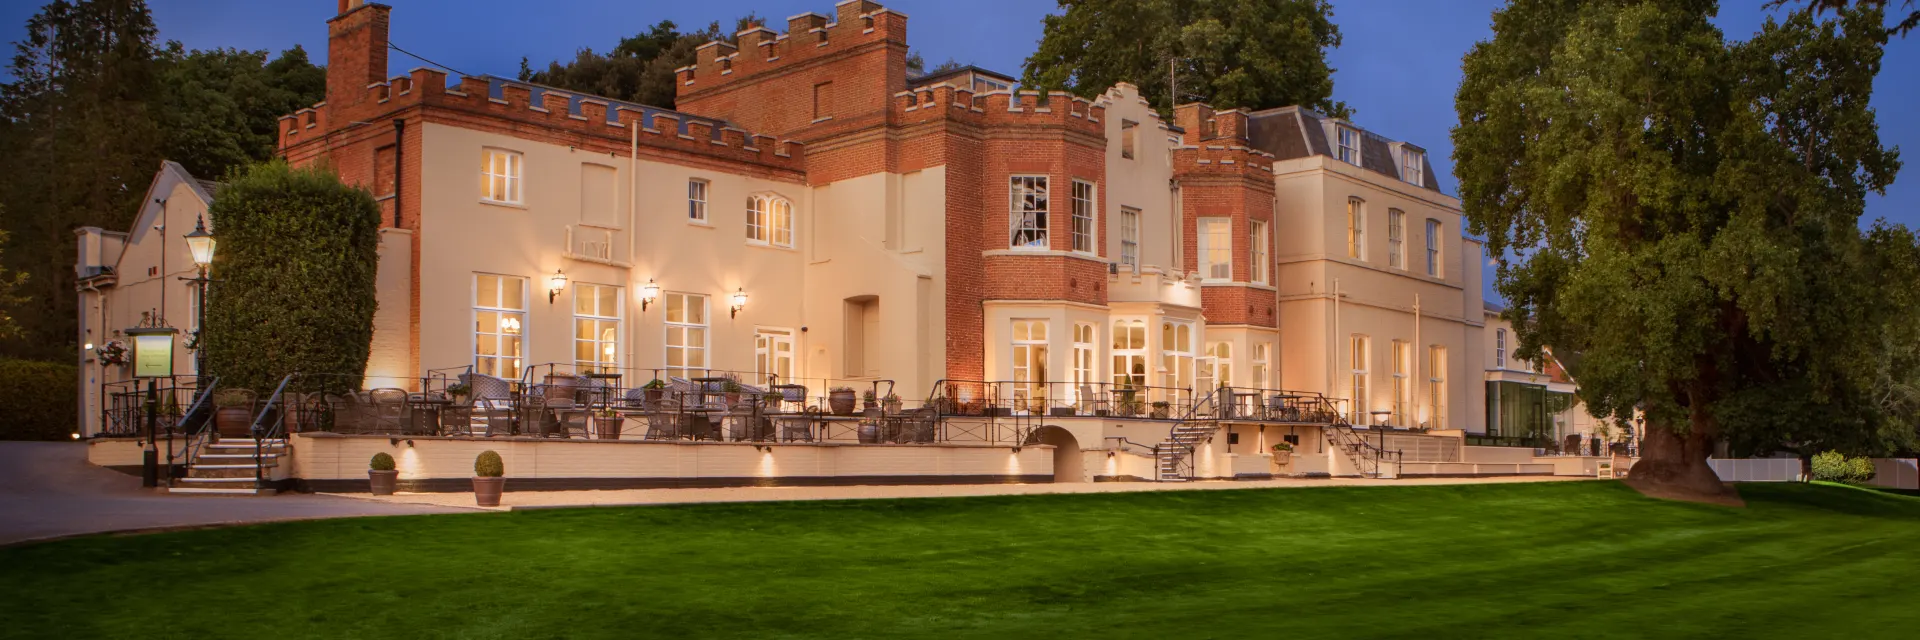 Taplow House Hotel And Spa